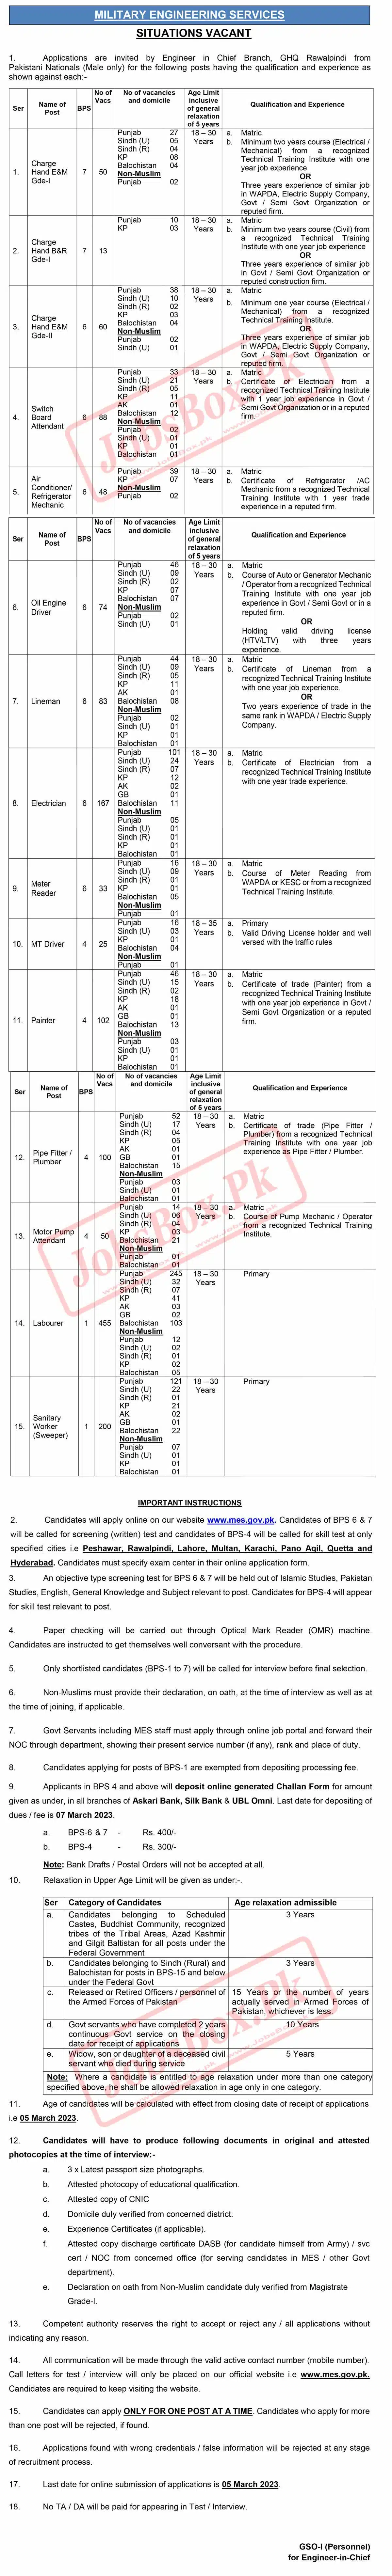 Military Engineering Services MES Jobs 2023 - www.jobs.mes.gov.pk Jobs